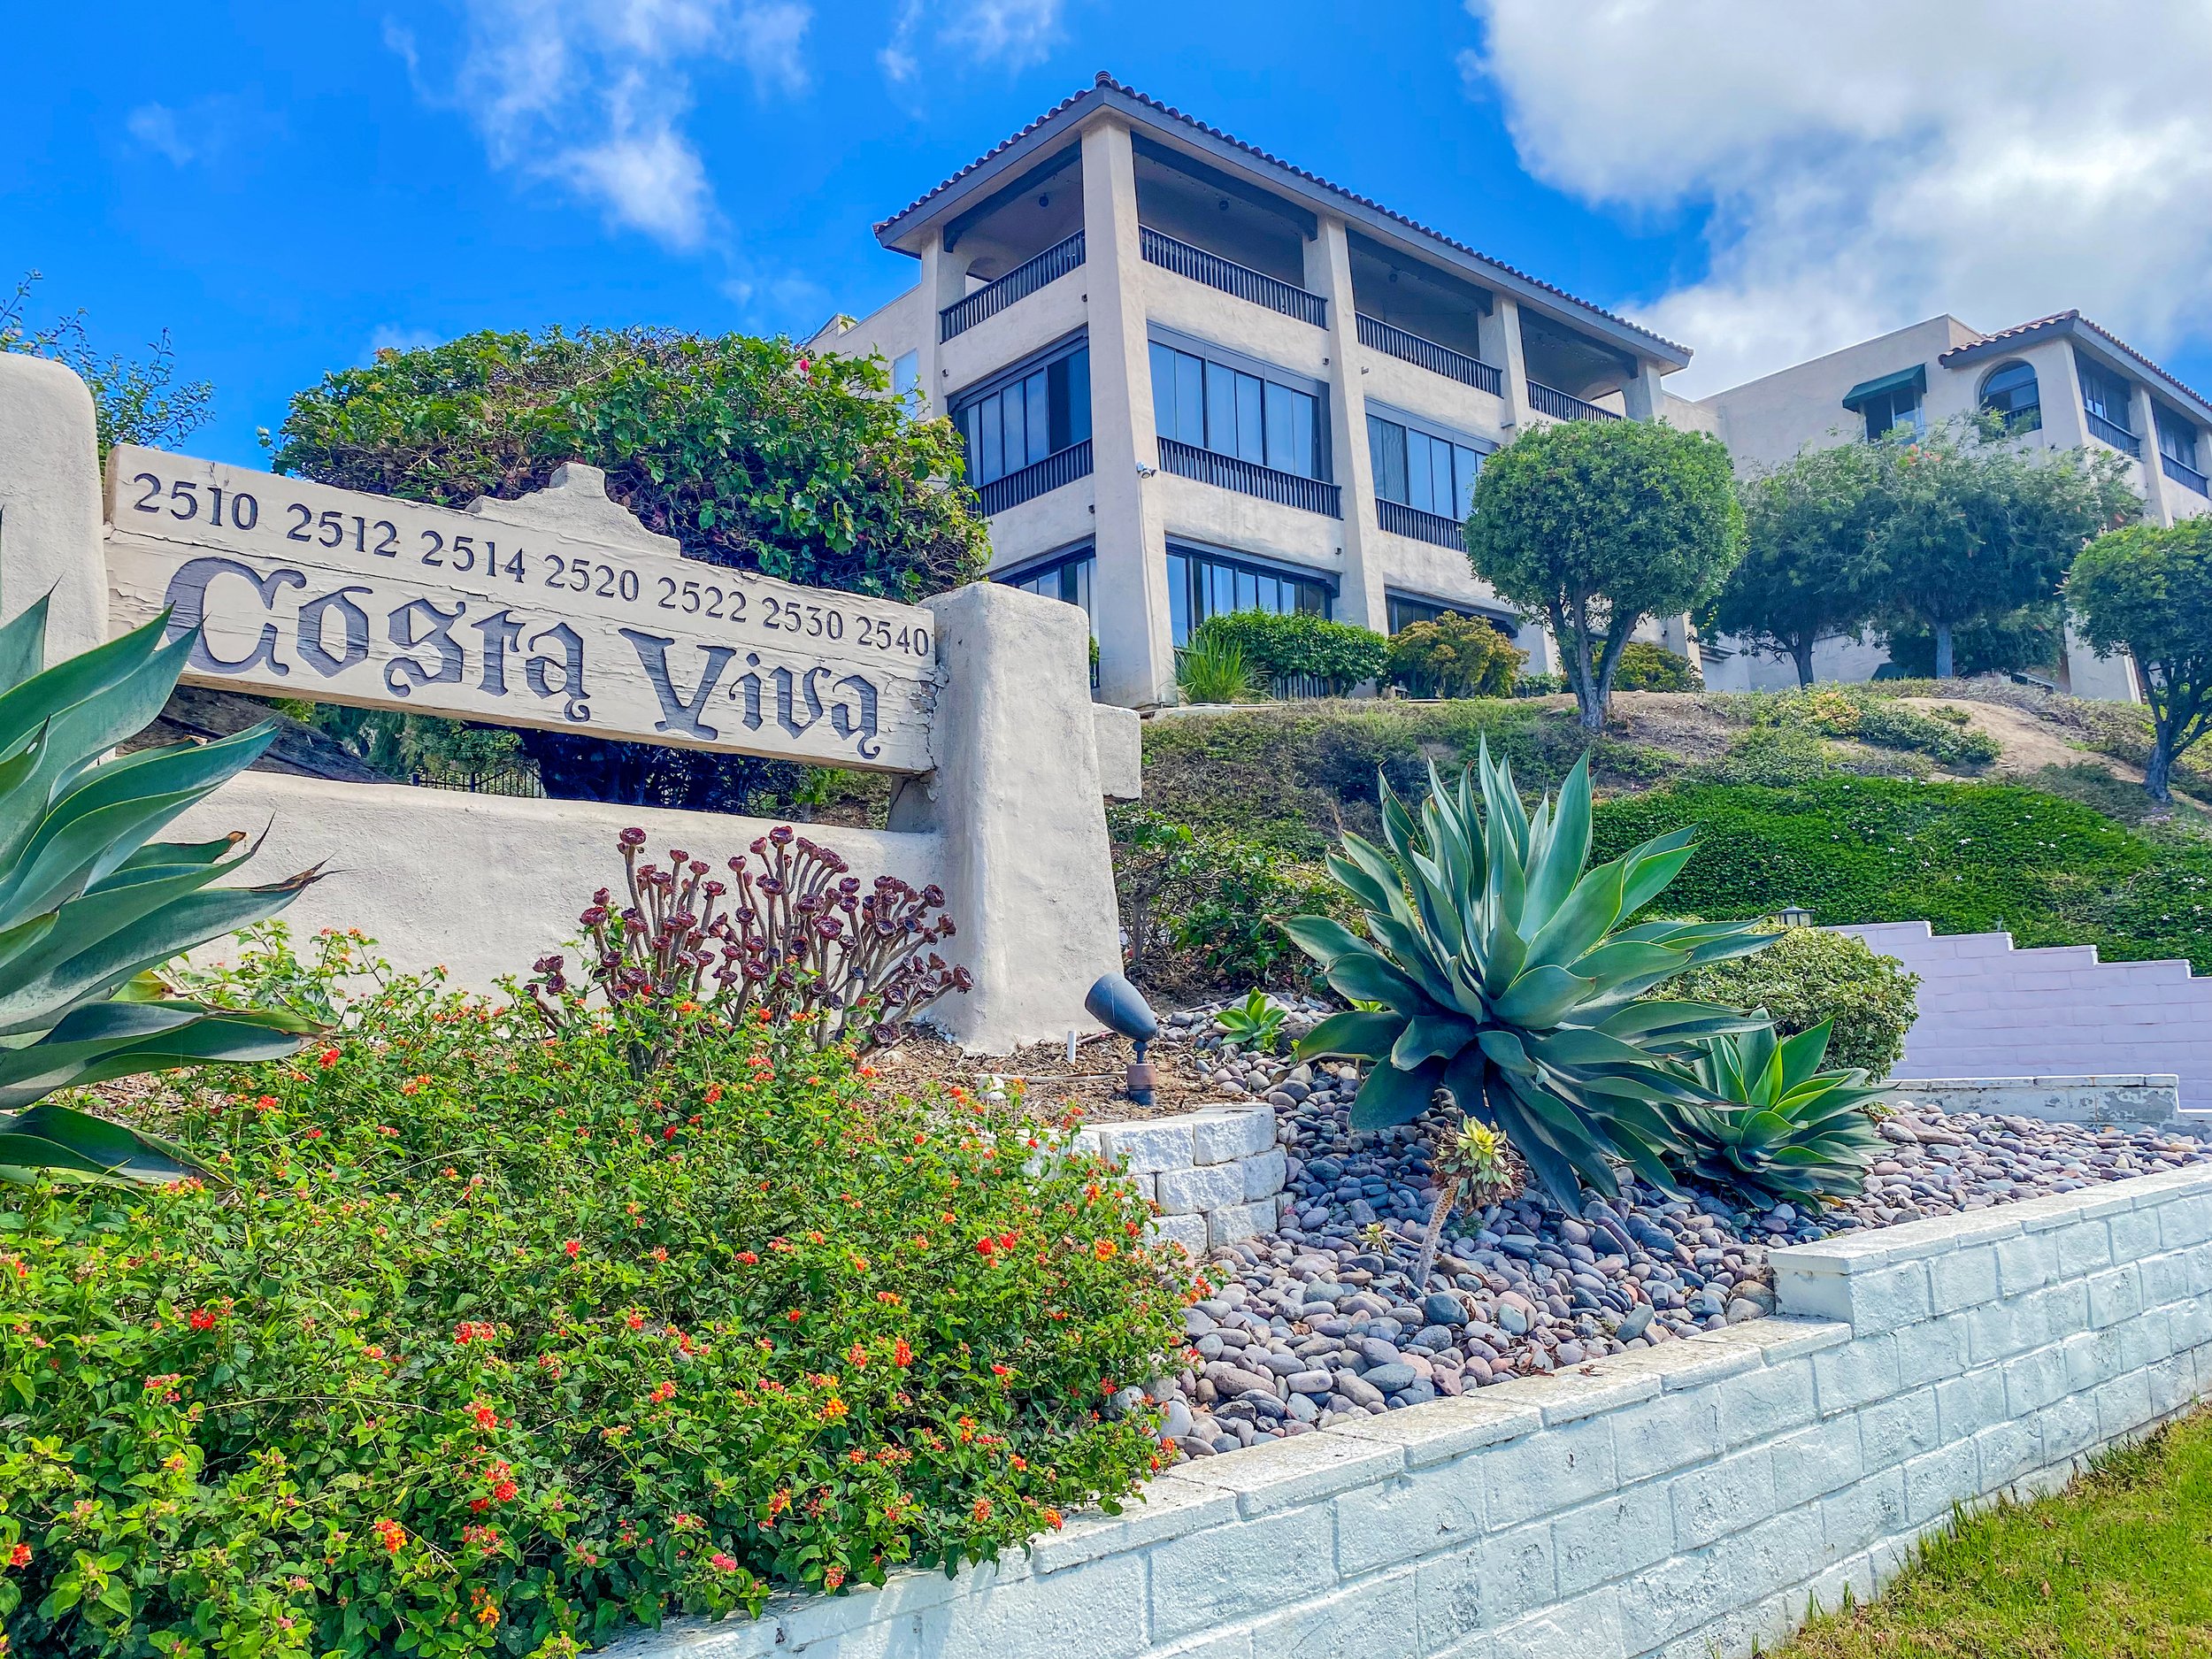 2540 Clairemont Drive #308, San Diego  I  $680,000